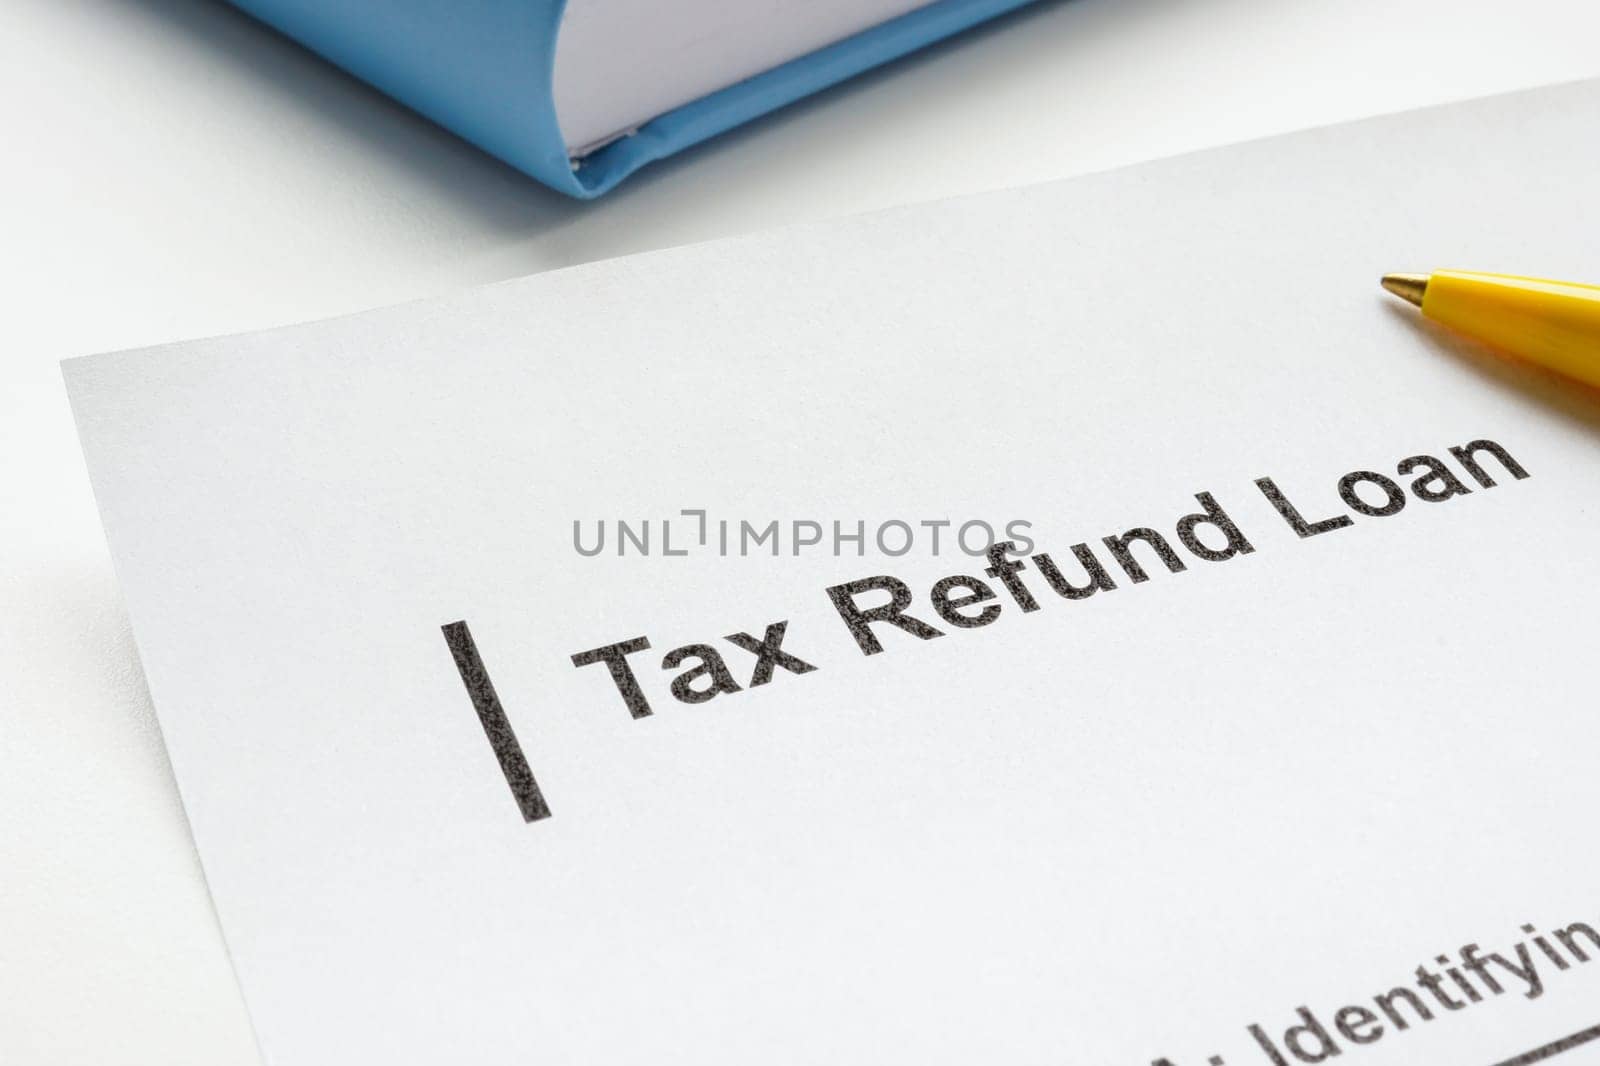 Tax refund loan application and pen. by designer491